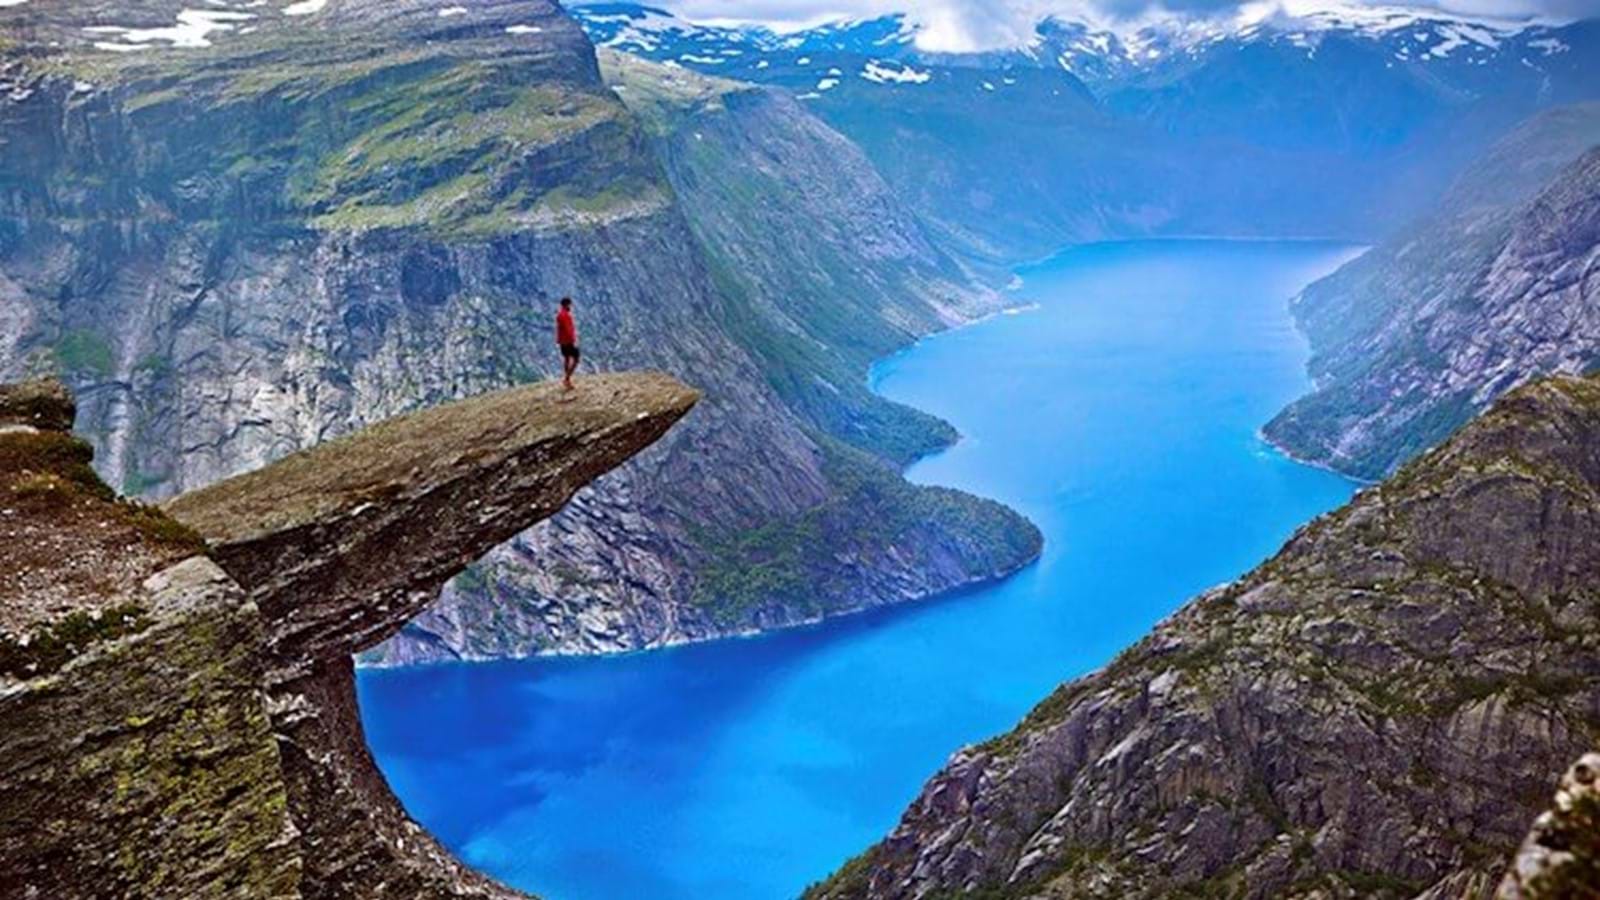 Person standing on the edge of a cliff overlooking a lake thinking about Unily